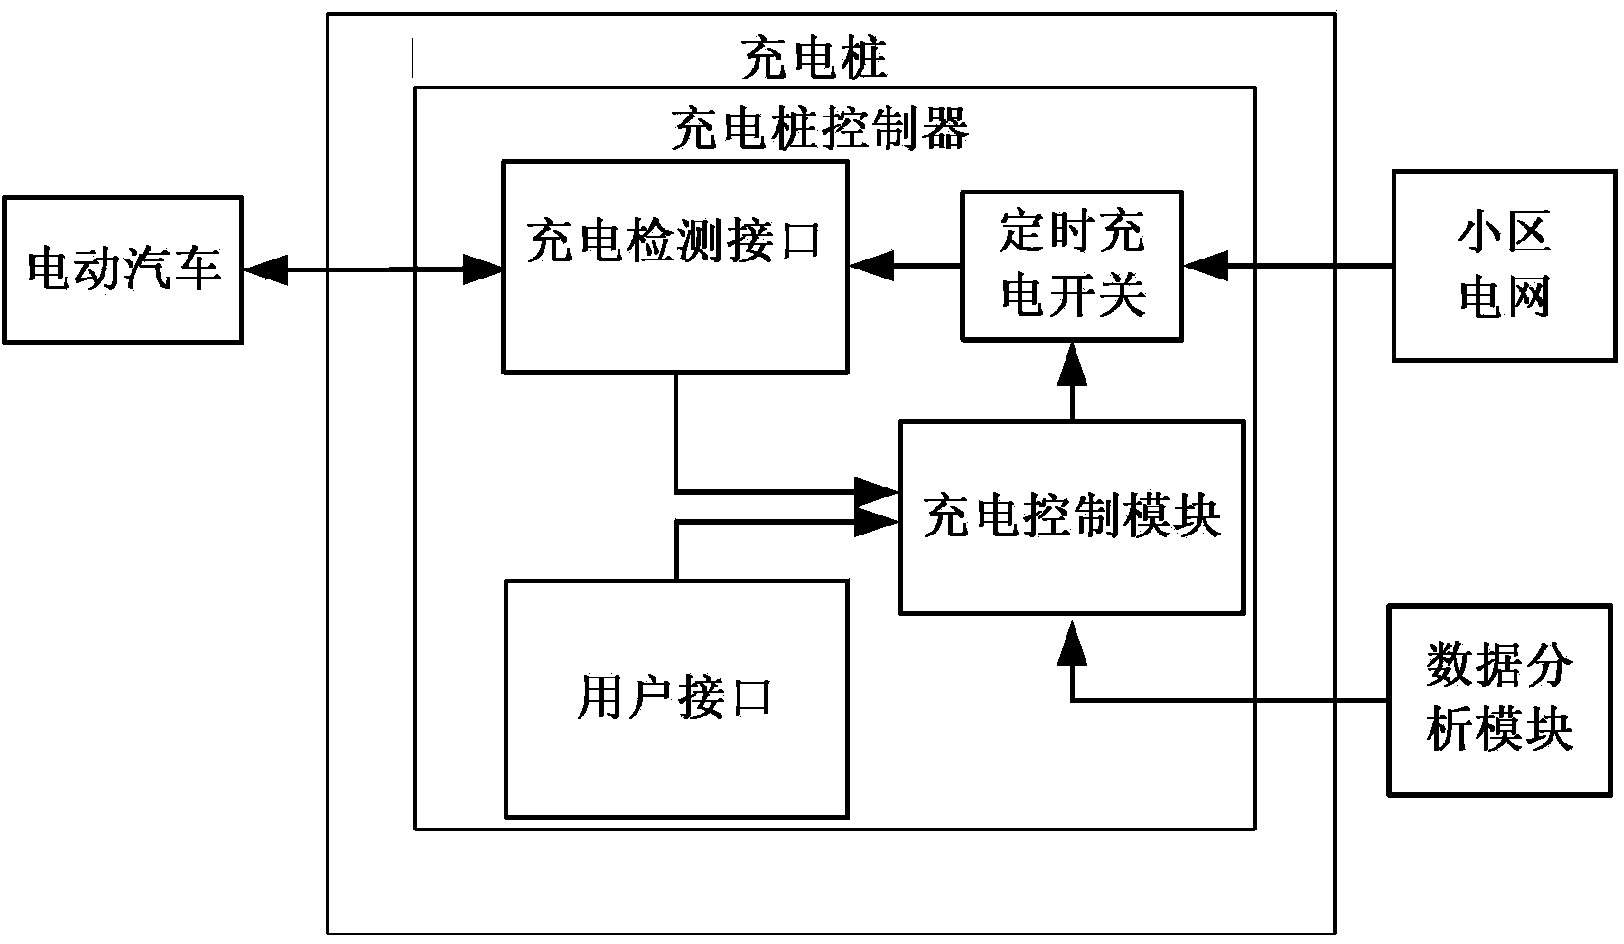 Automatic charging control system and method used for domestic electromobile in residential area